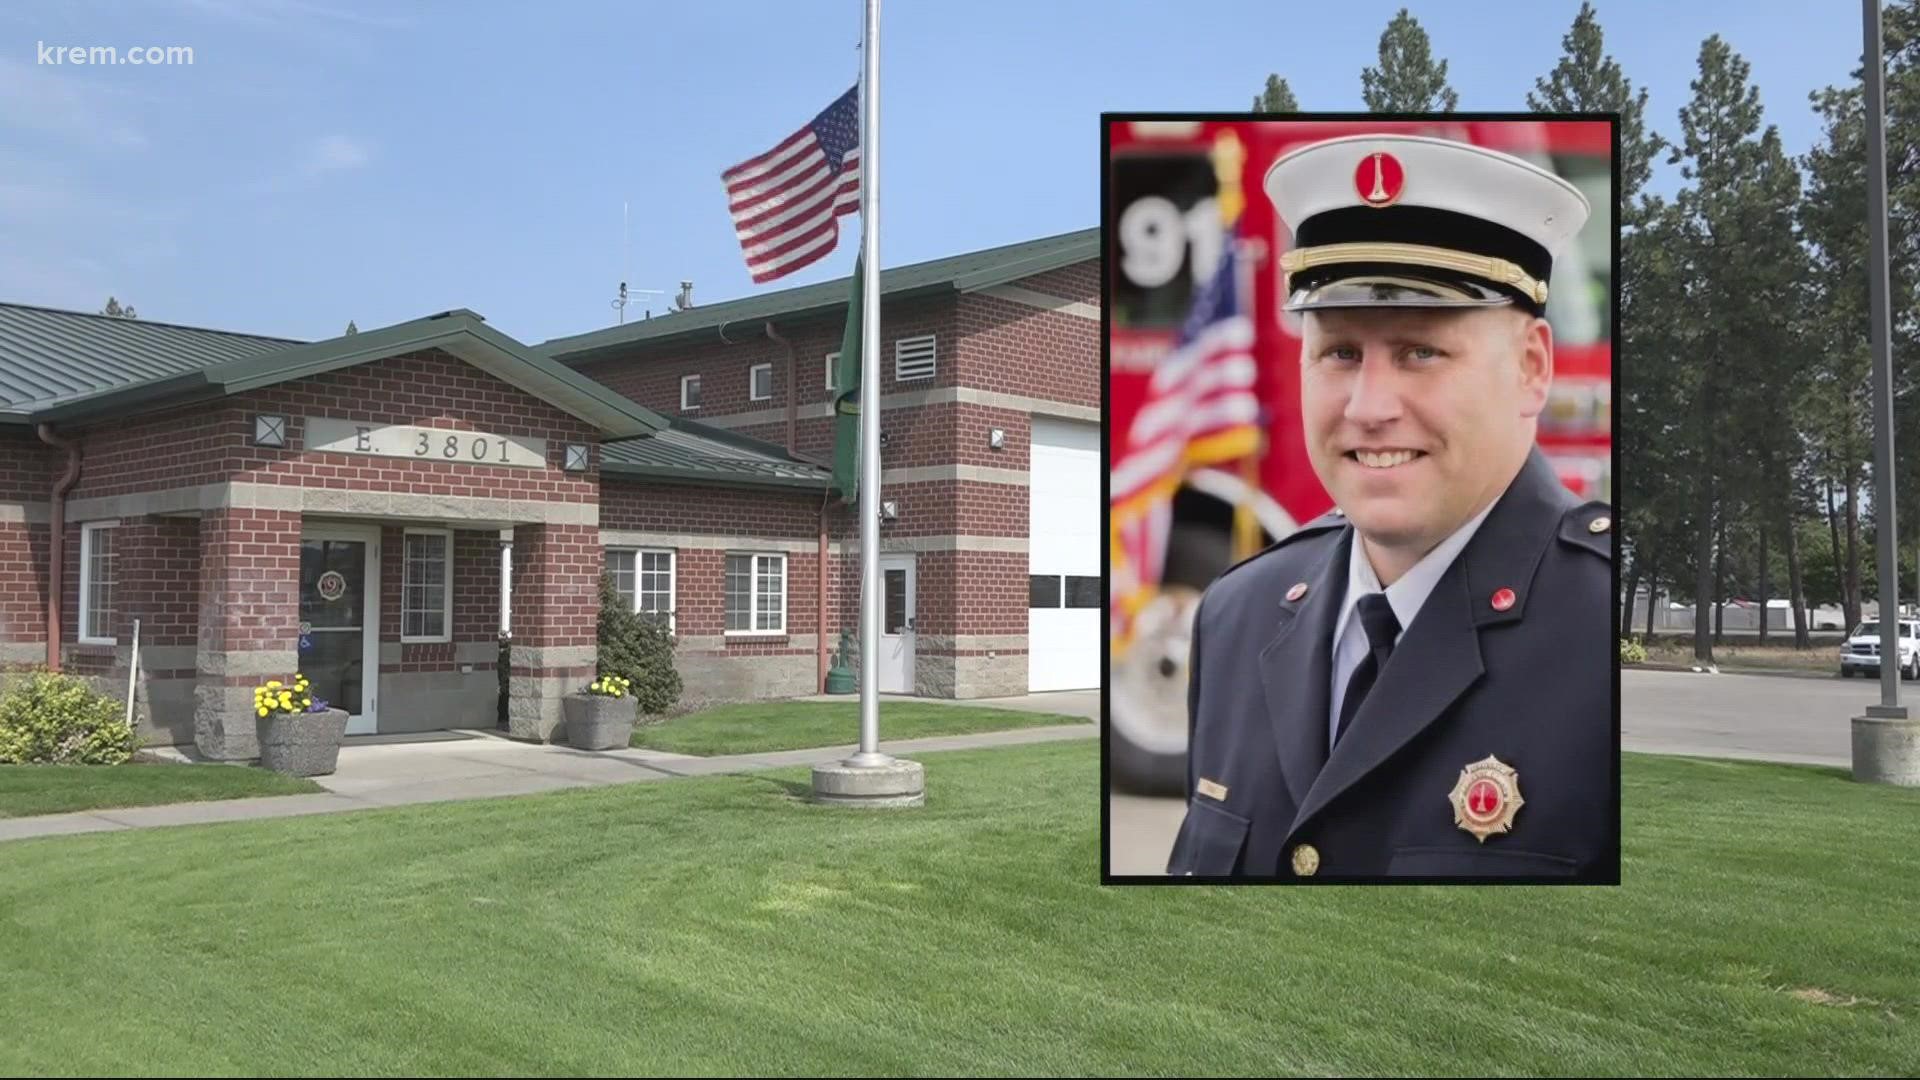 Cody Traber was an 18-year veteran of Spokane County Fire District 9. He also served at Stevens County Fire District 1, Cheney Fire Department and DNR.